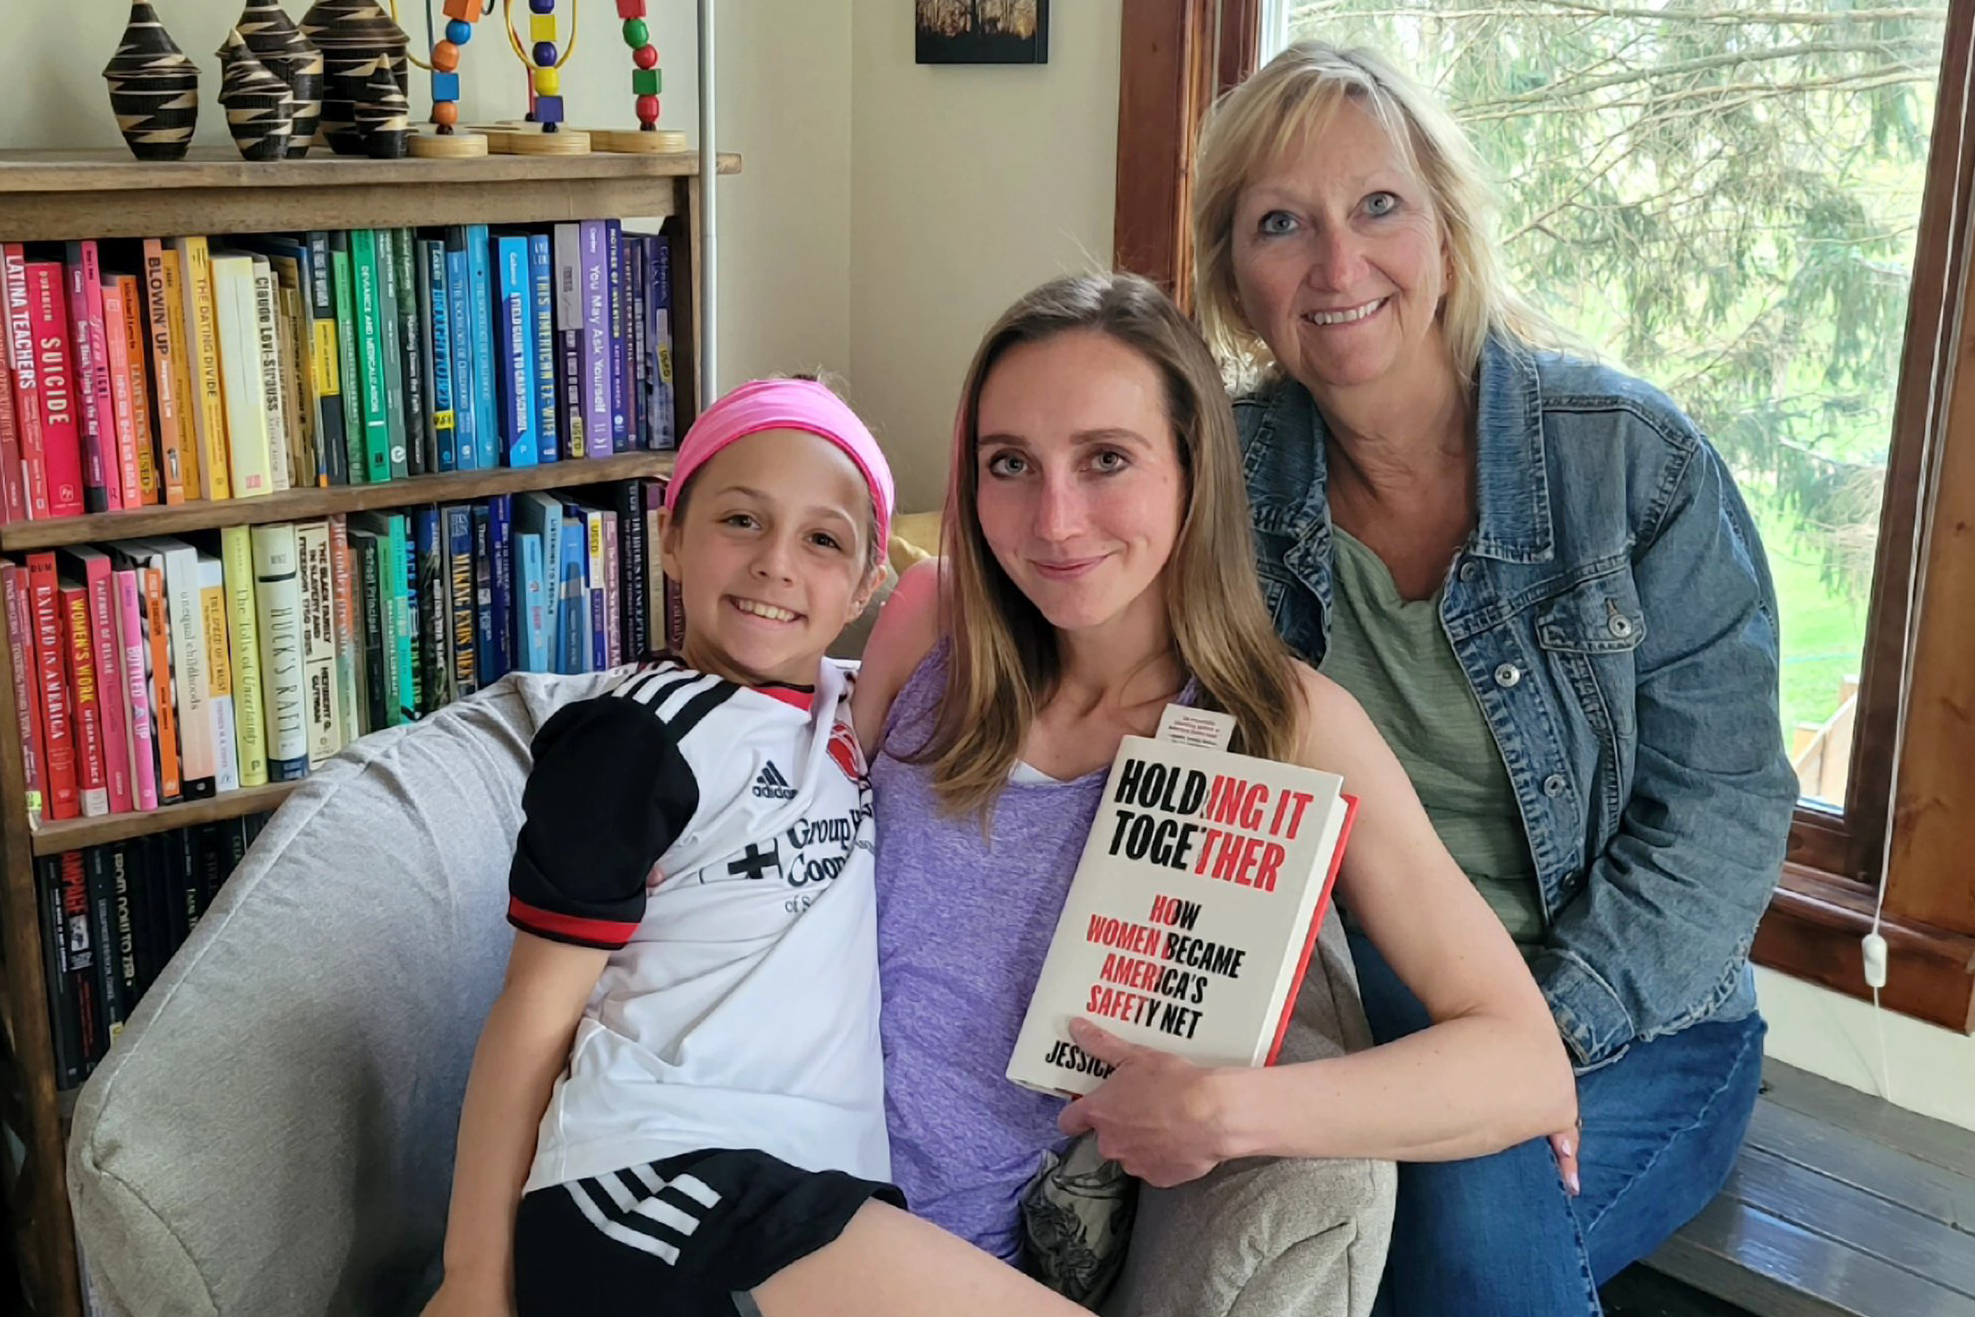 Jessica Calarco, center, poses with her daughter, Layla Calarco, and mother, Anne McCrory, in this undated photo provided by Jessica Calarco. Calarco is holding a copy of her book, "Holding It Together: How Women Became America's Safety Net." (Jessica Calarco via AP)